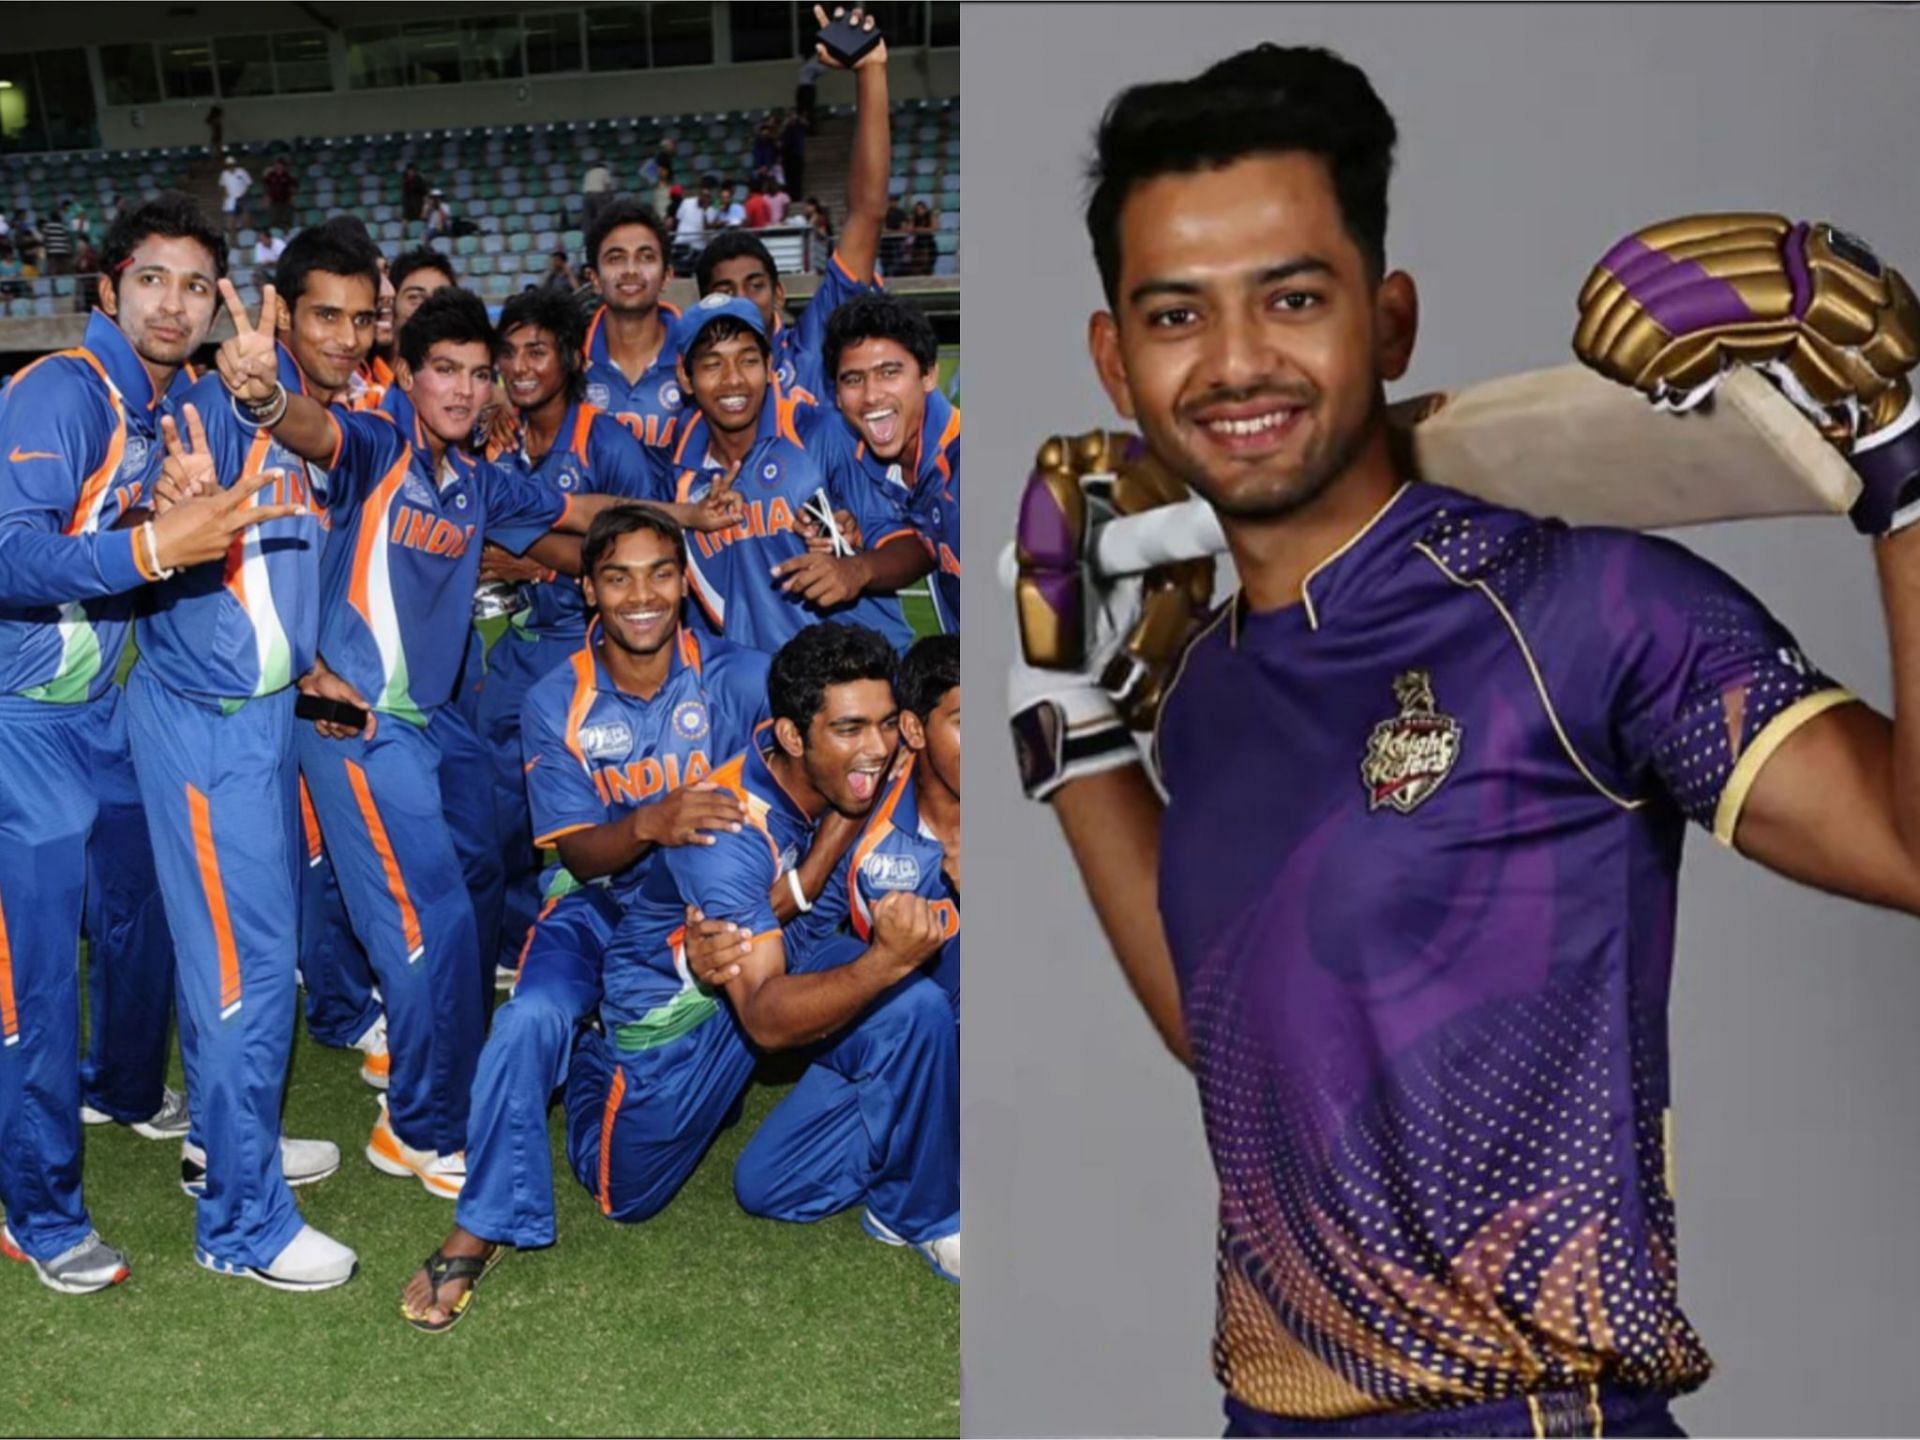 3 players from India's U19 squad in 2012 who now play in the USA ft. Unmukt Chand 